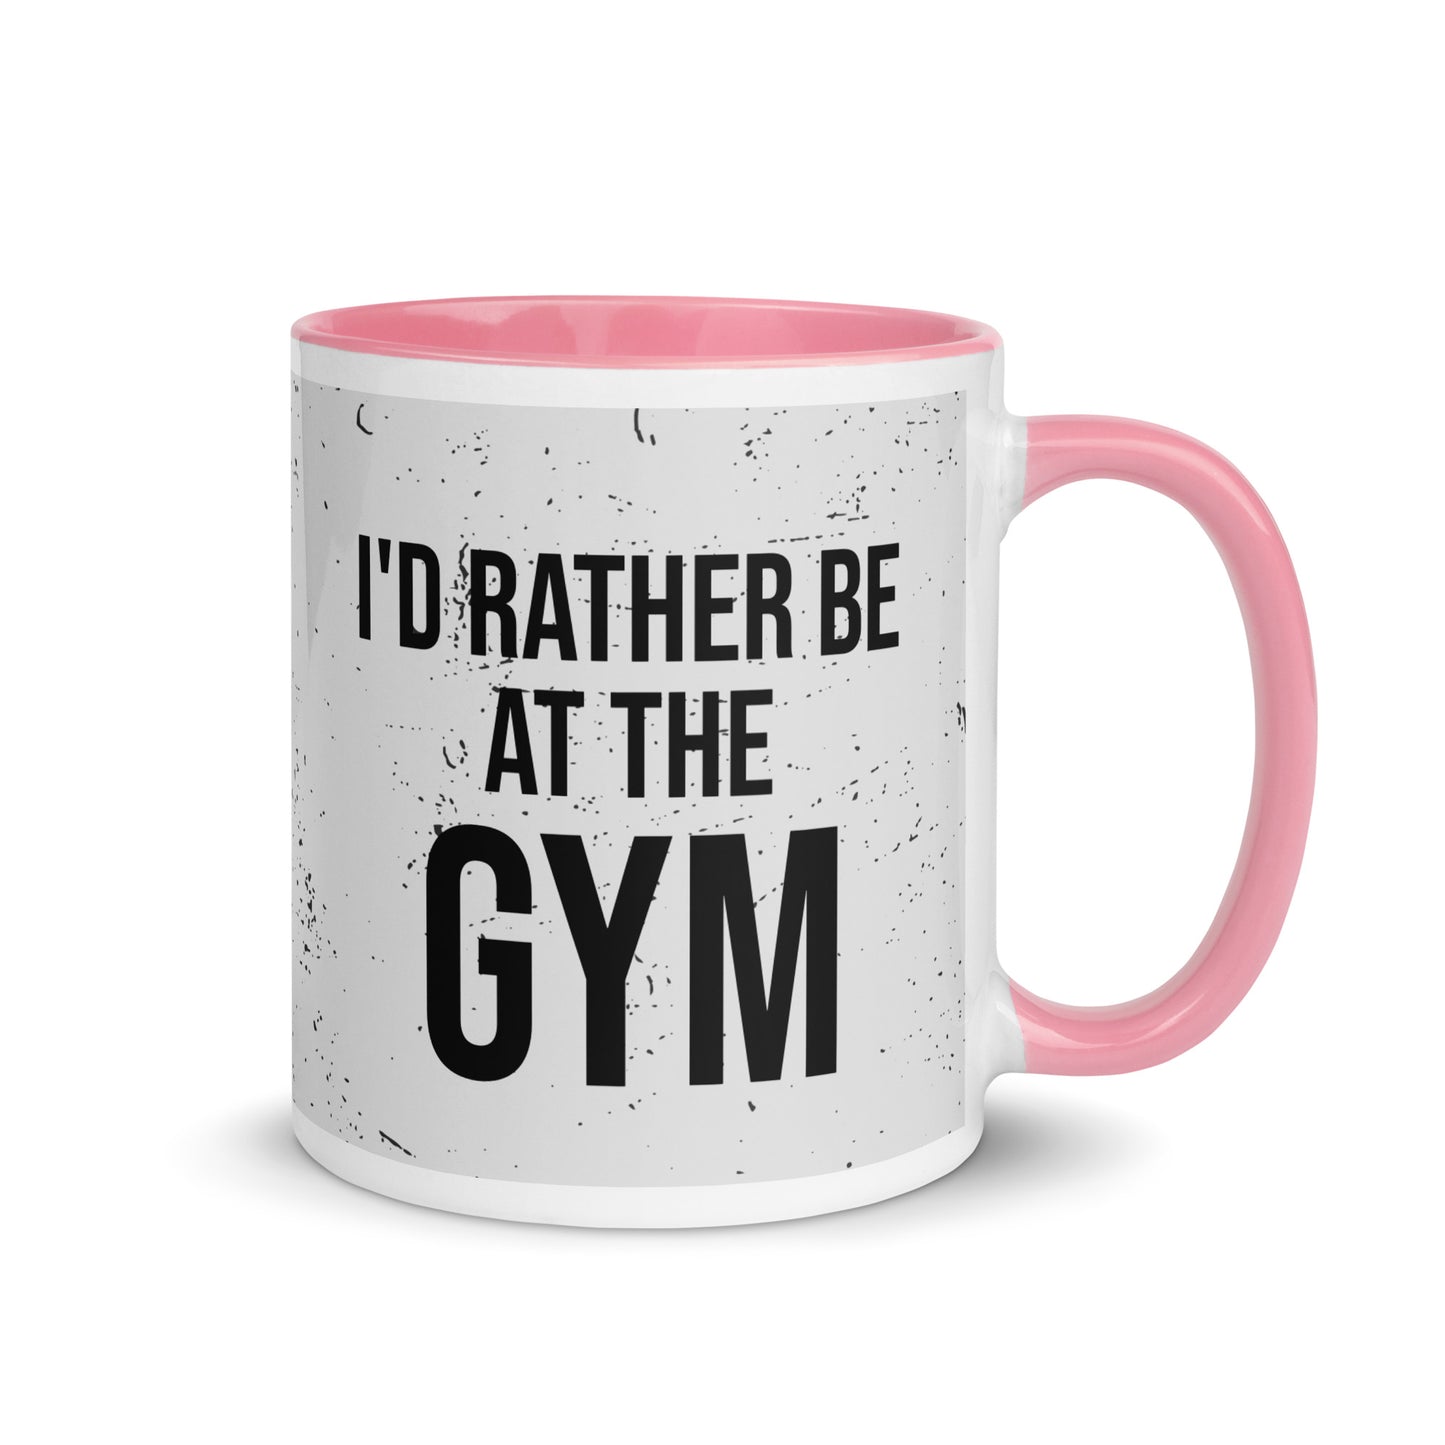 Pink handled mug with I'd rather be at the gym written on it, across a grey splatter background. A gift for someone who loves the gym.